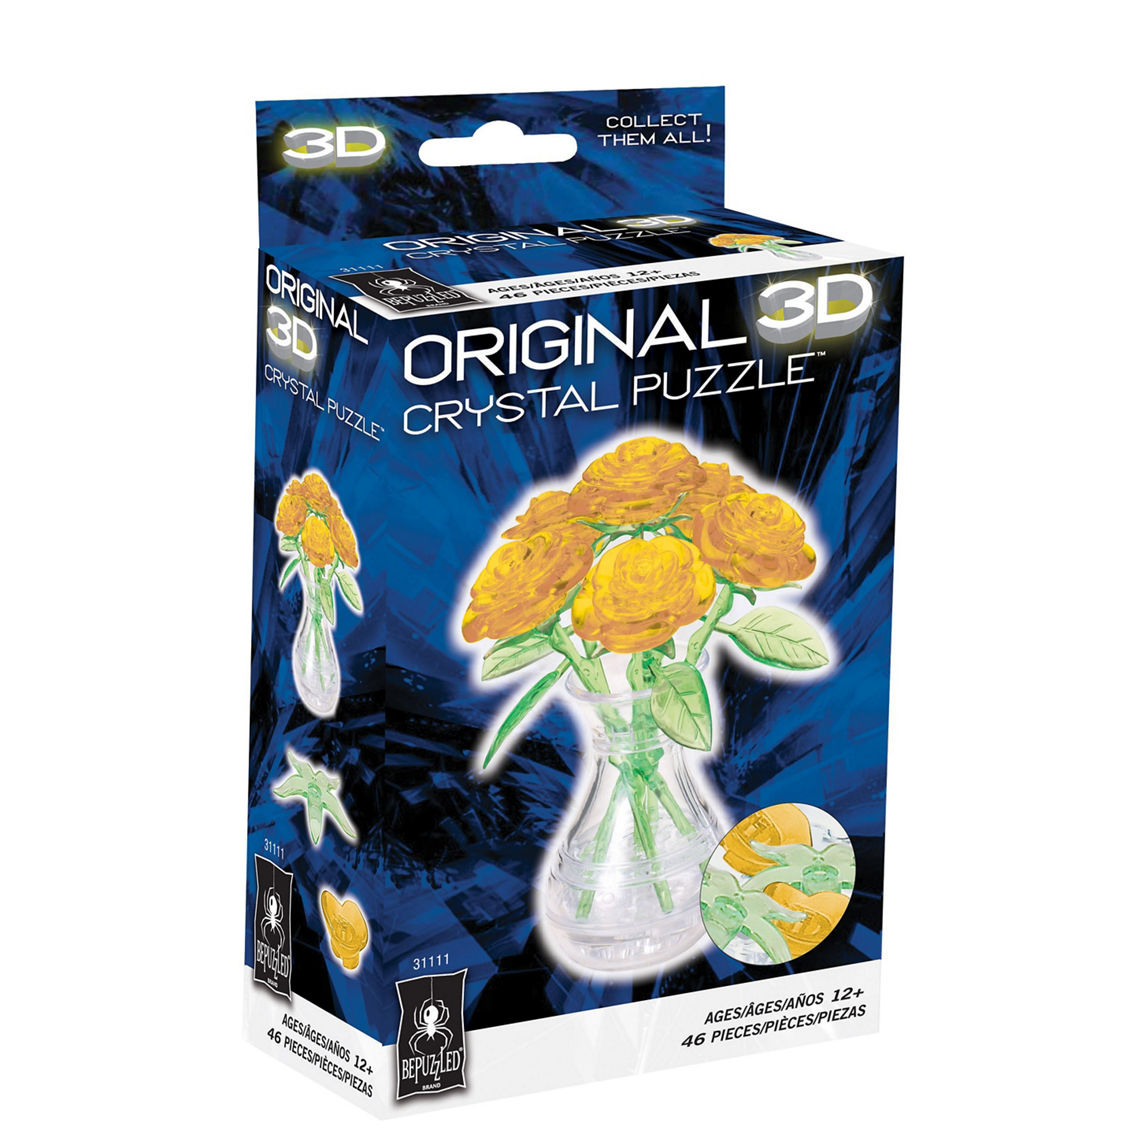 BePuzzled 3D Crystal Puzzle - Roses in a Vase (Yellow): 46 Pcs - Image 2 of 5